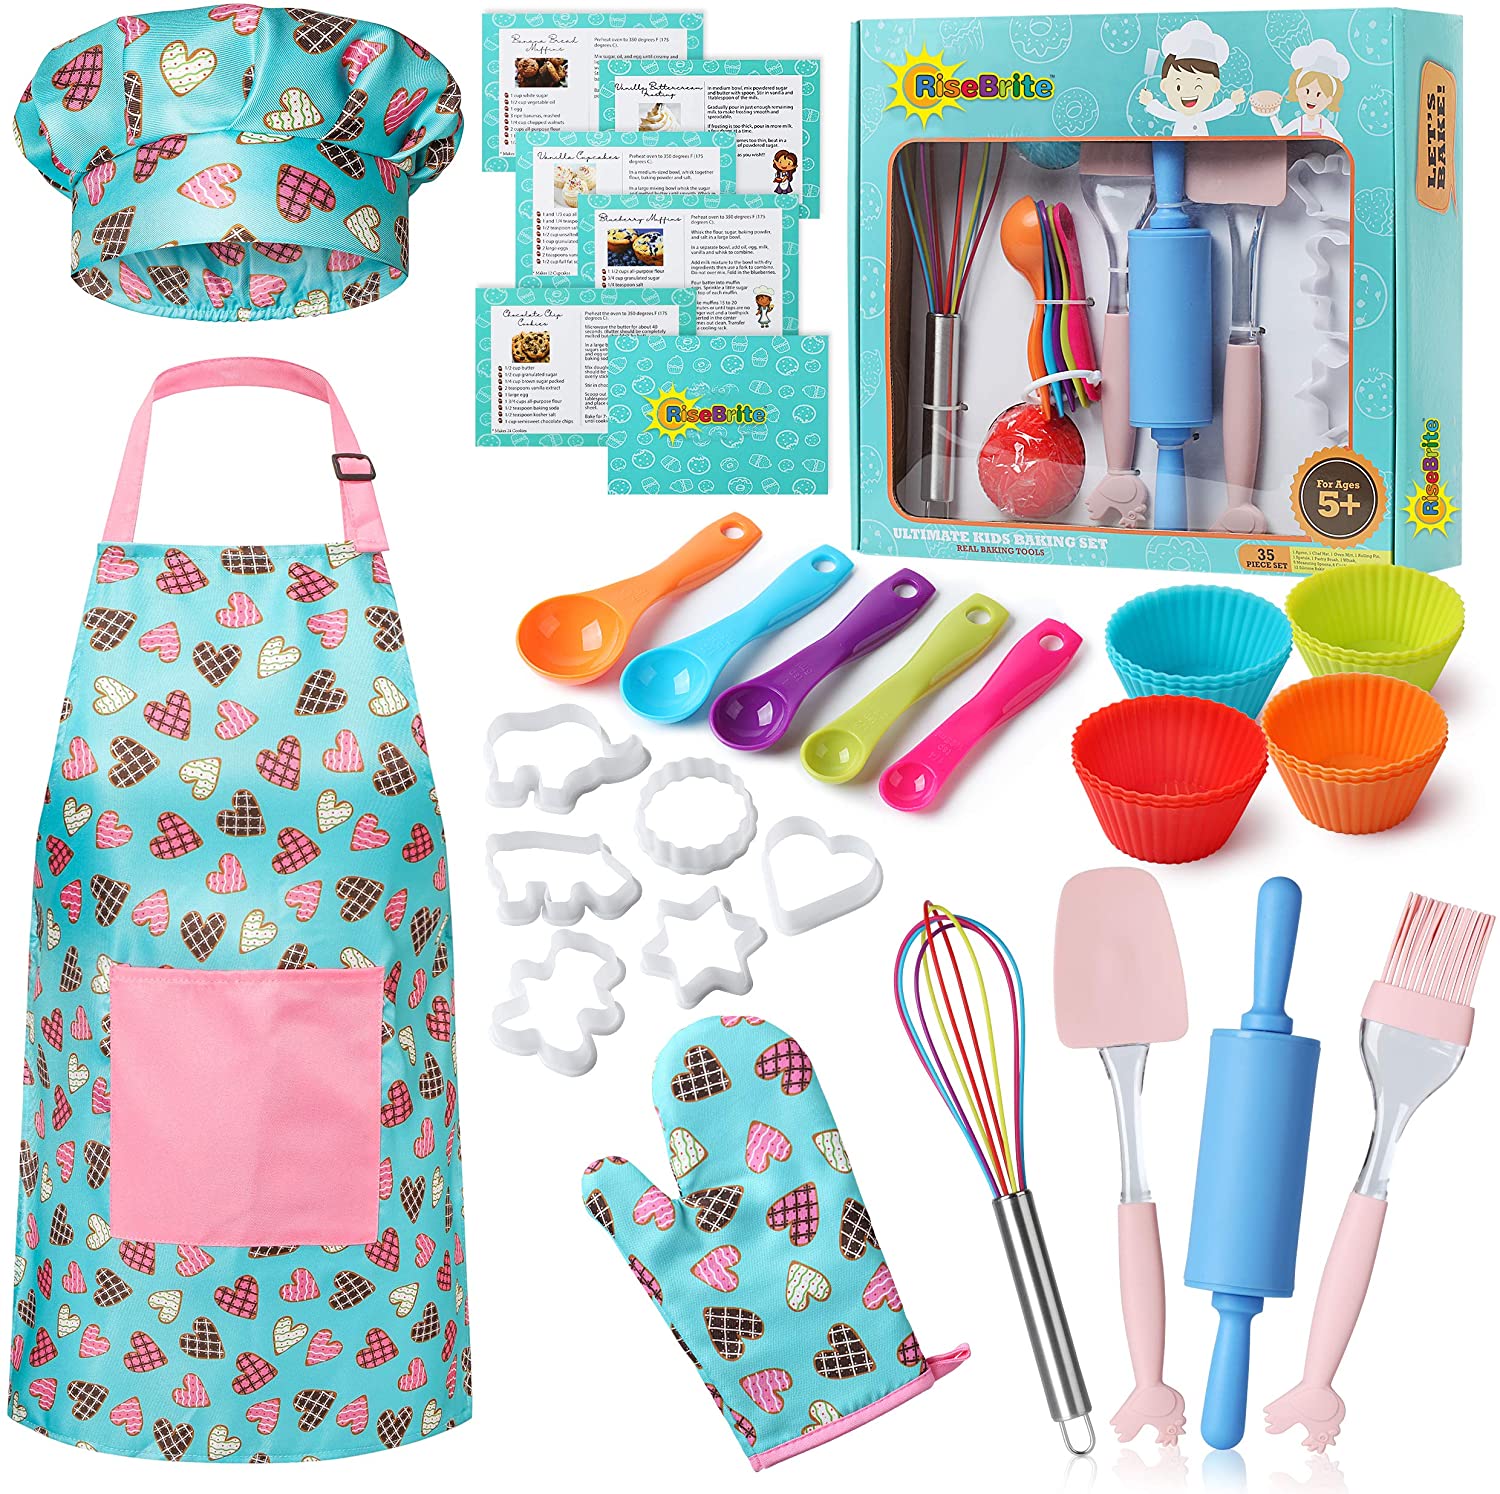 Kids Cooking and Baking Set 15 PCS with Chef Hat Apron Oven Mitt P7F0 